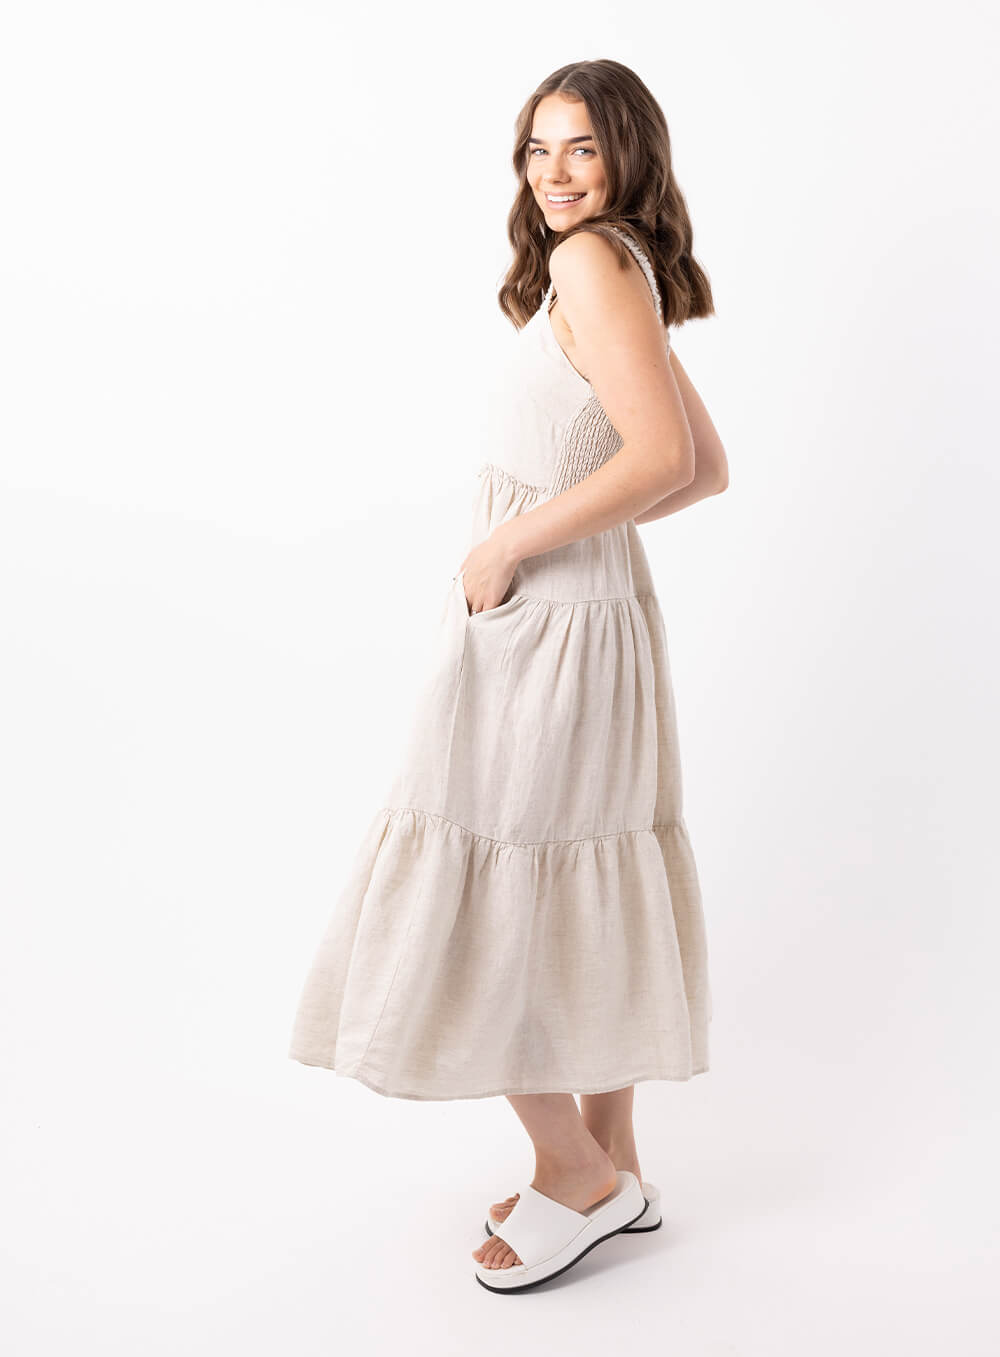 The Finlay Linen dress in beige is made from 100% breathable linen, featuring a tiered skirt, thin rouched straps and 2 side pockets